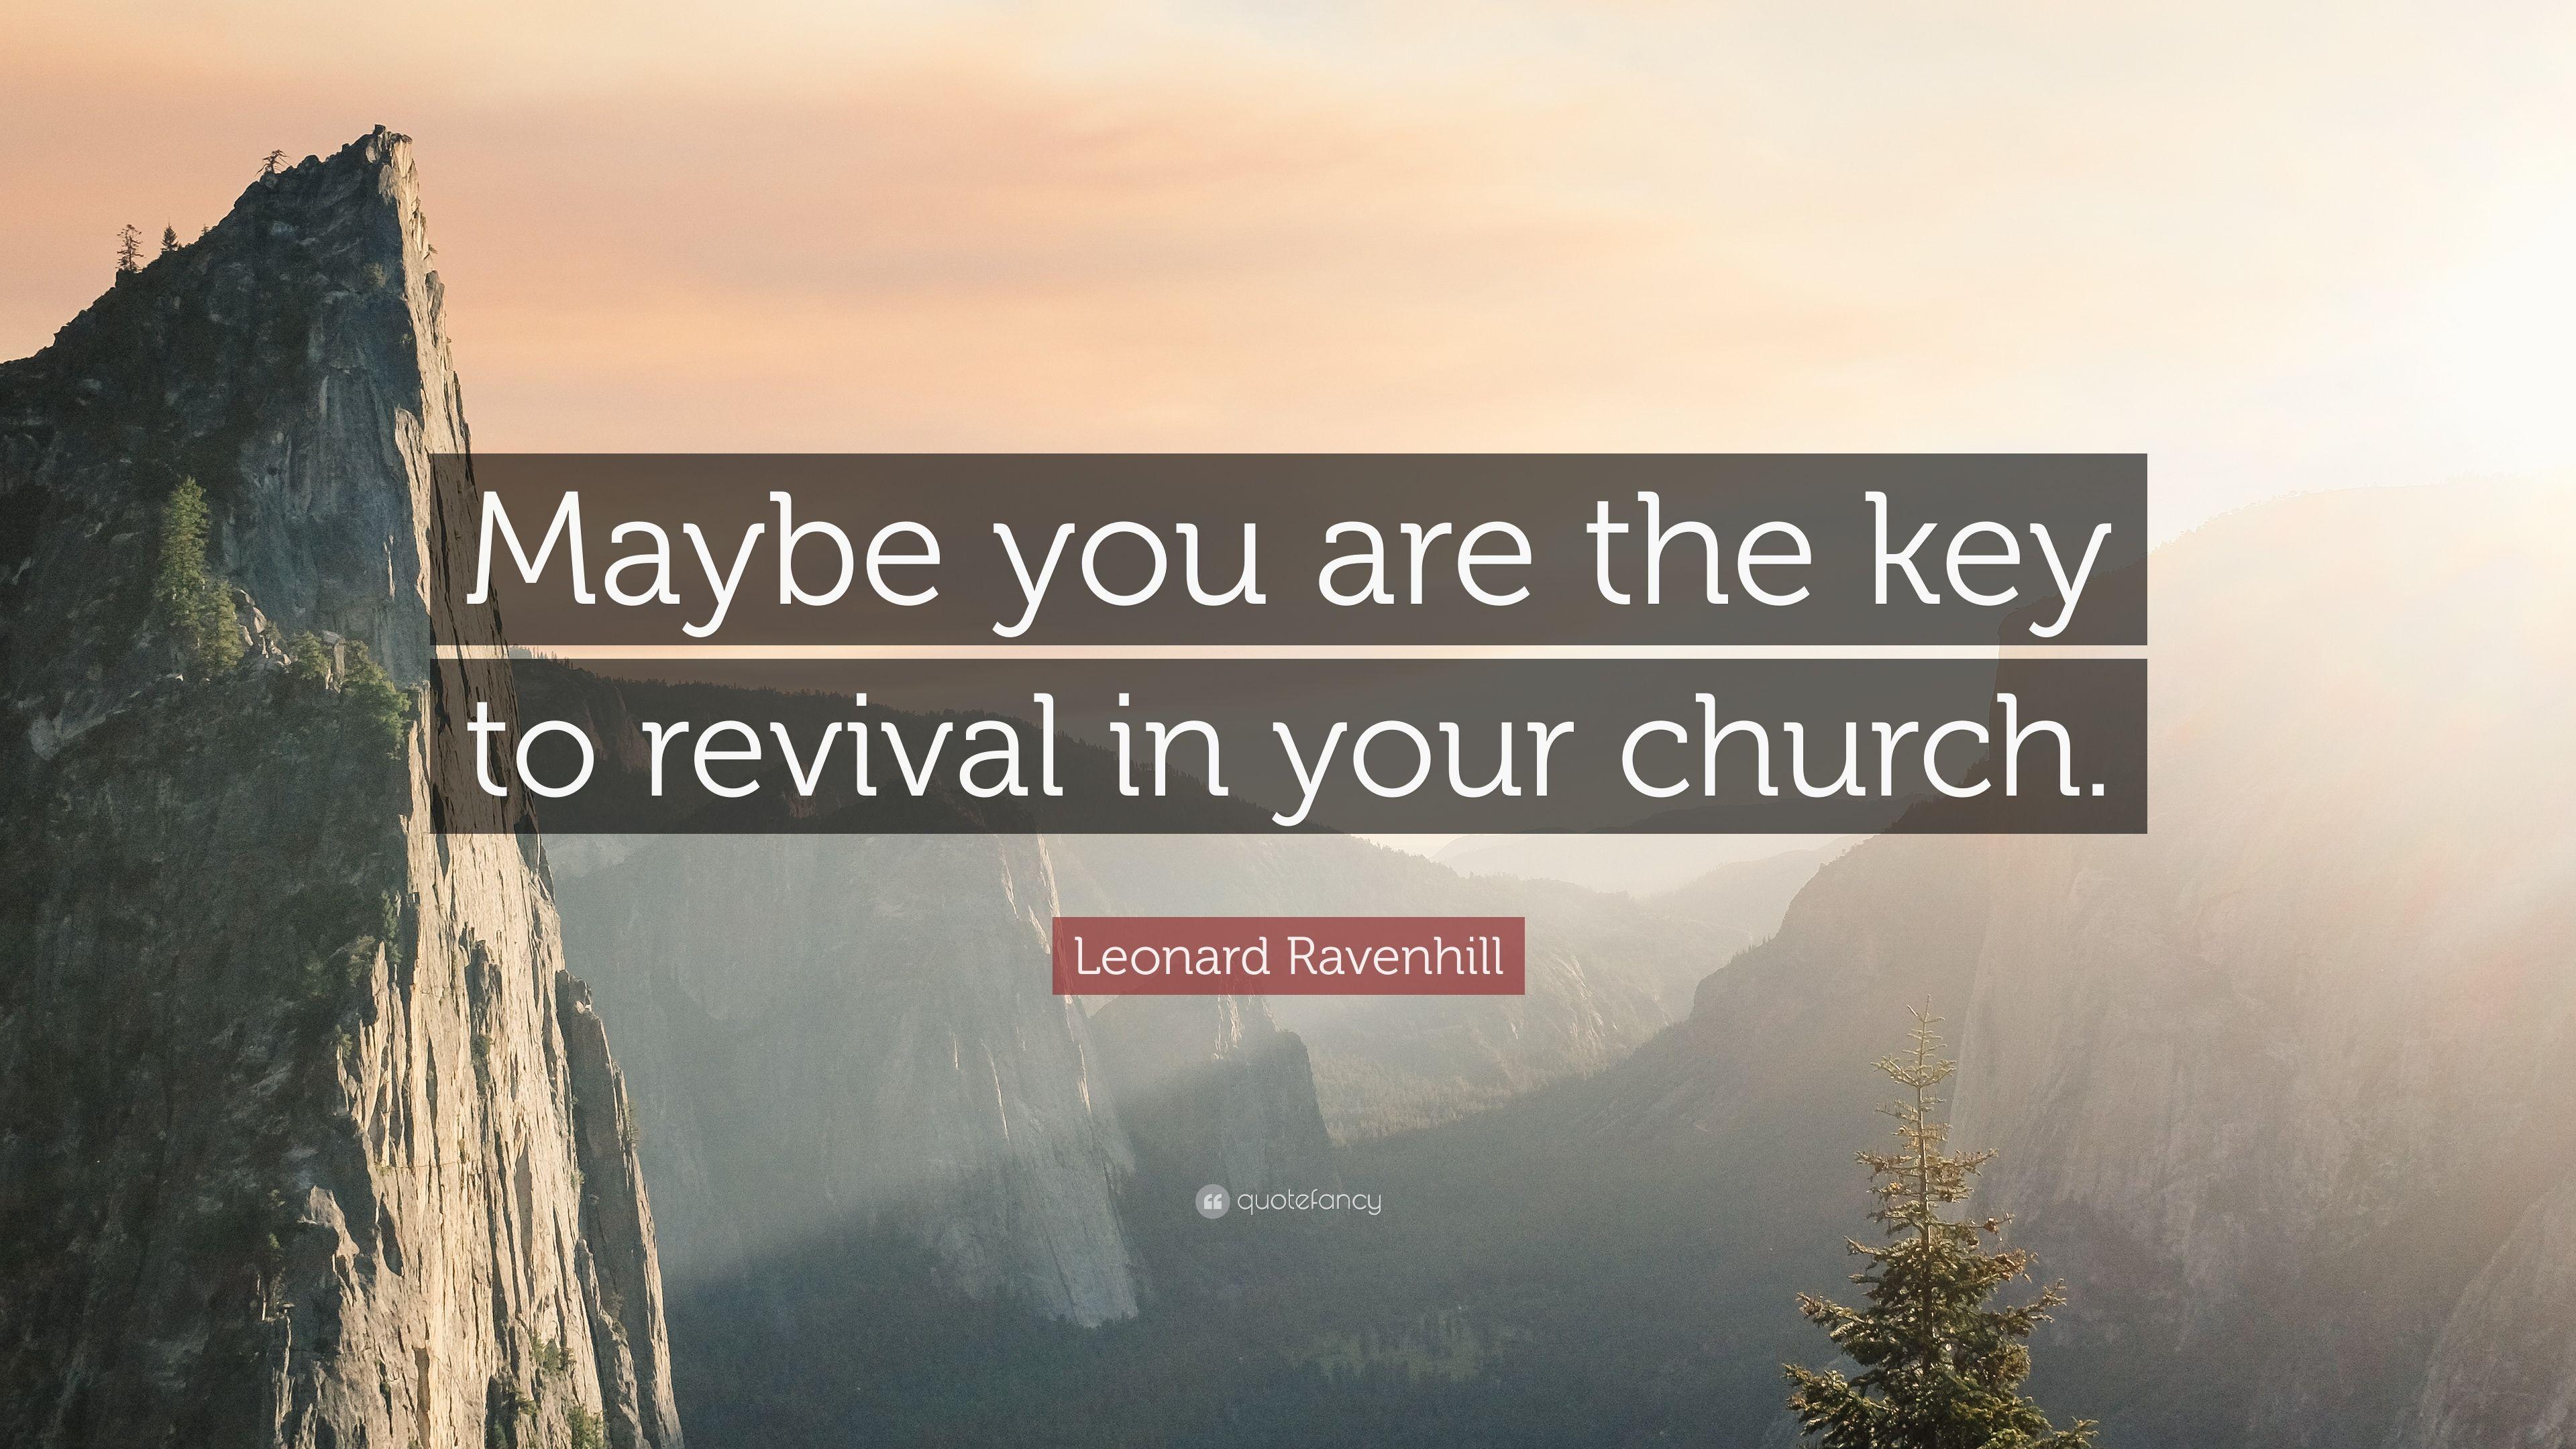 Leonard Ravenhill Quote: “Maybe you are the key to revival in your